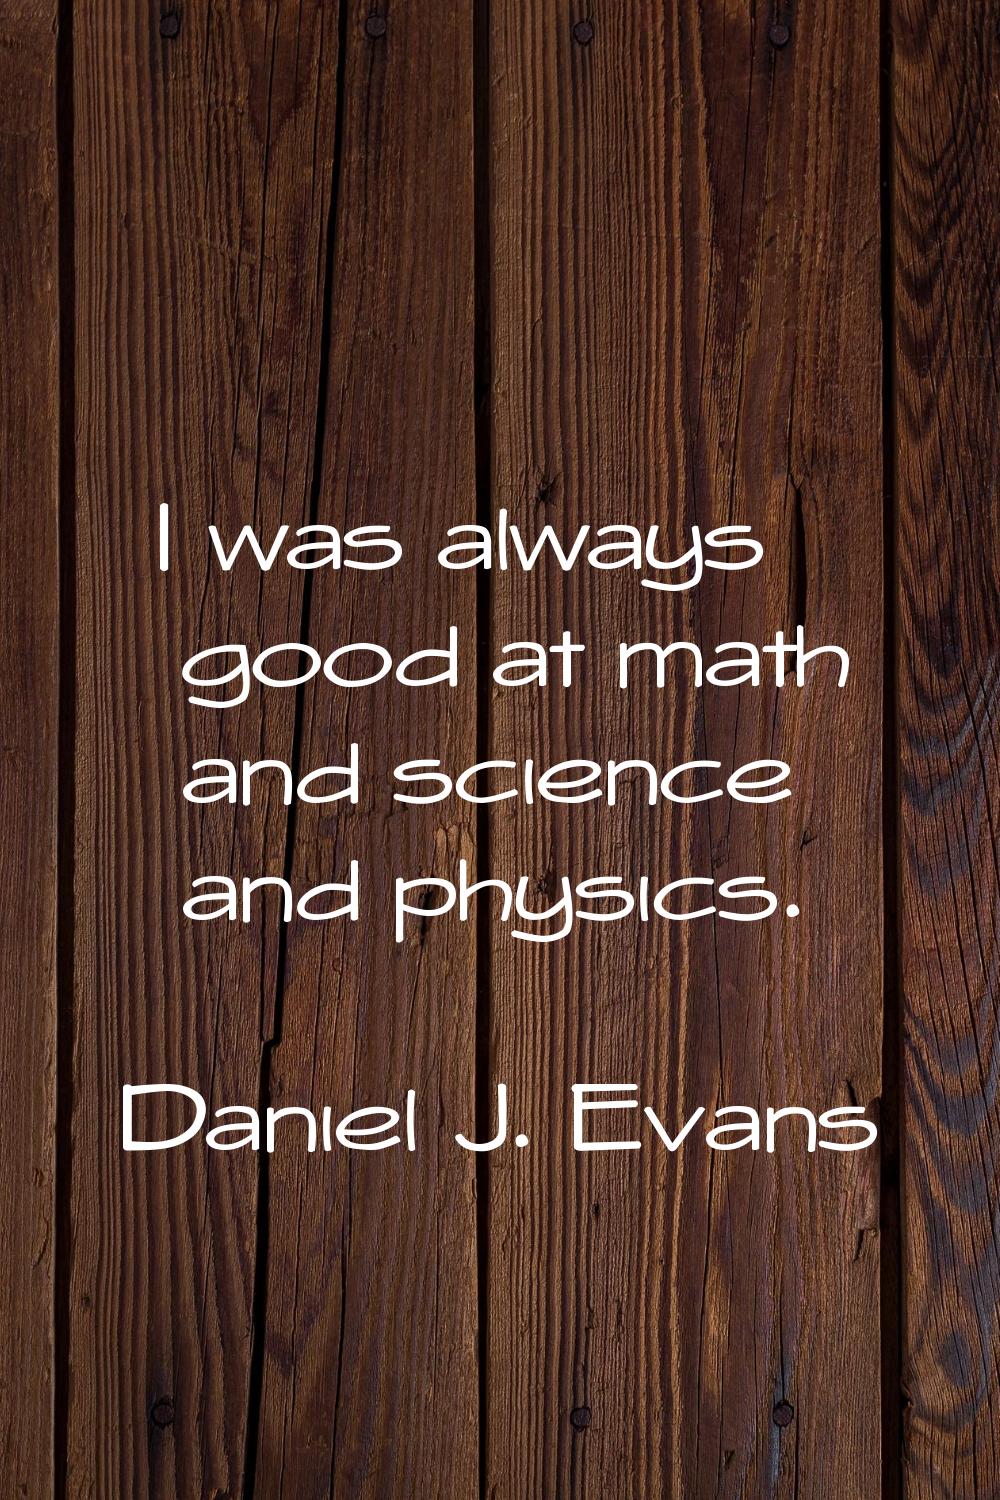 I was always good at math and science and physics.